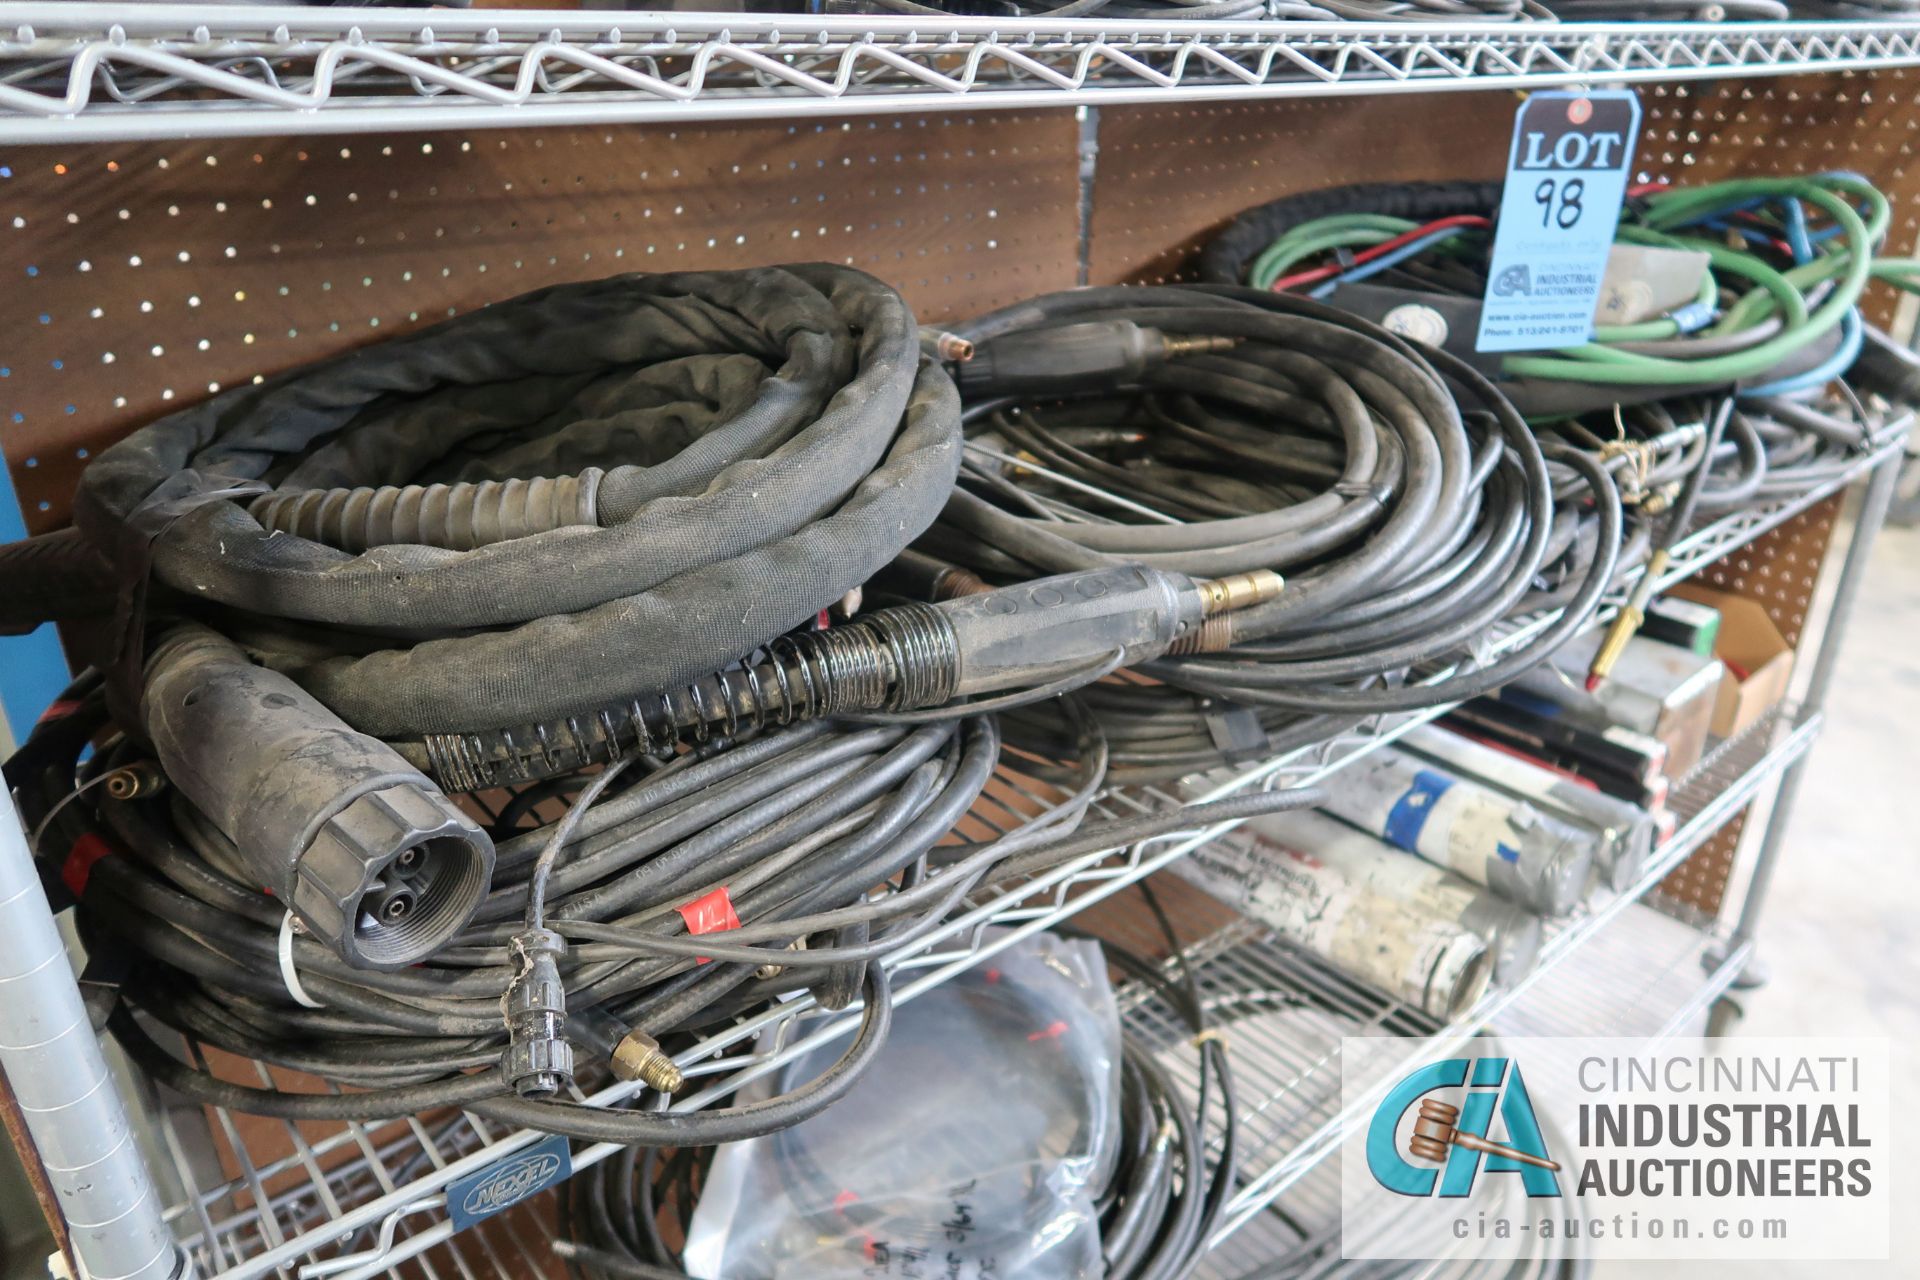 (LOT) MISCELLANEOUS WELDING WIRE FEED CONTROLS, MIG GUNS WITH HOSE AND OTHER WIRE FEED AND WELDING - Image 2 of 4